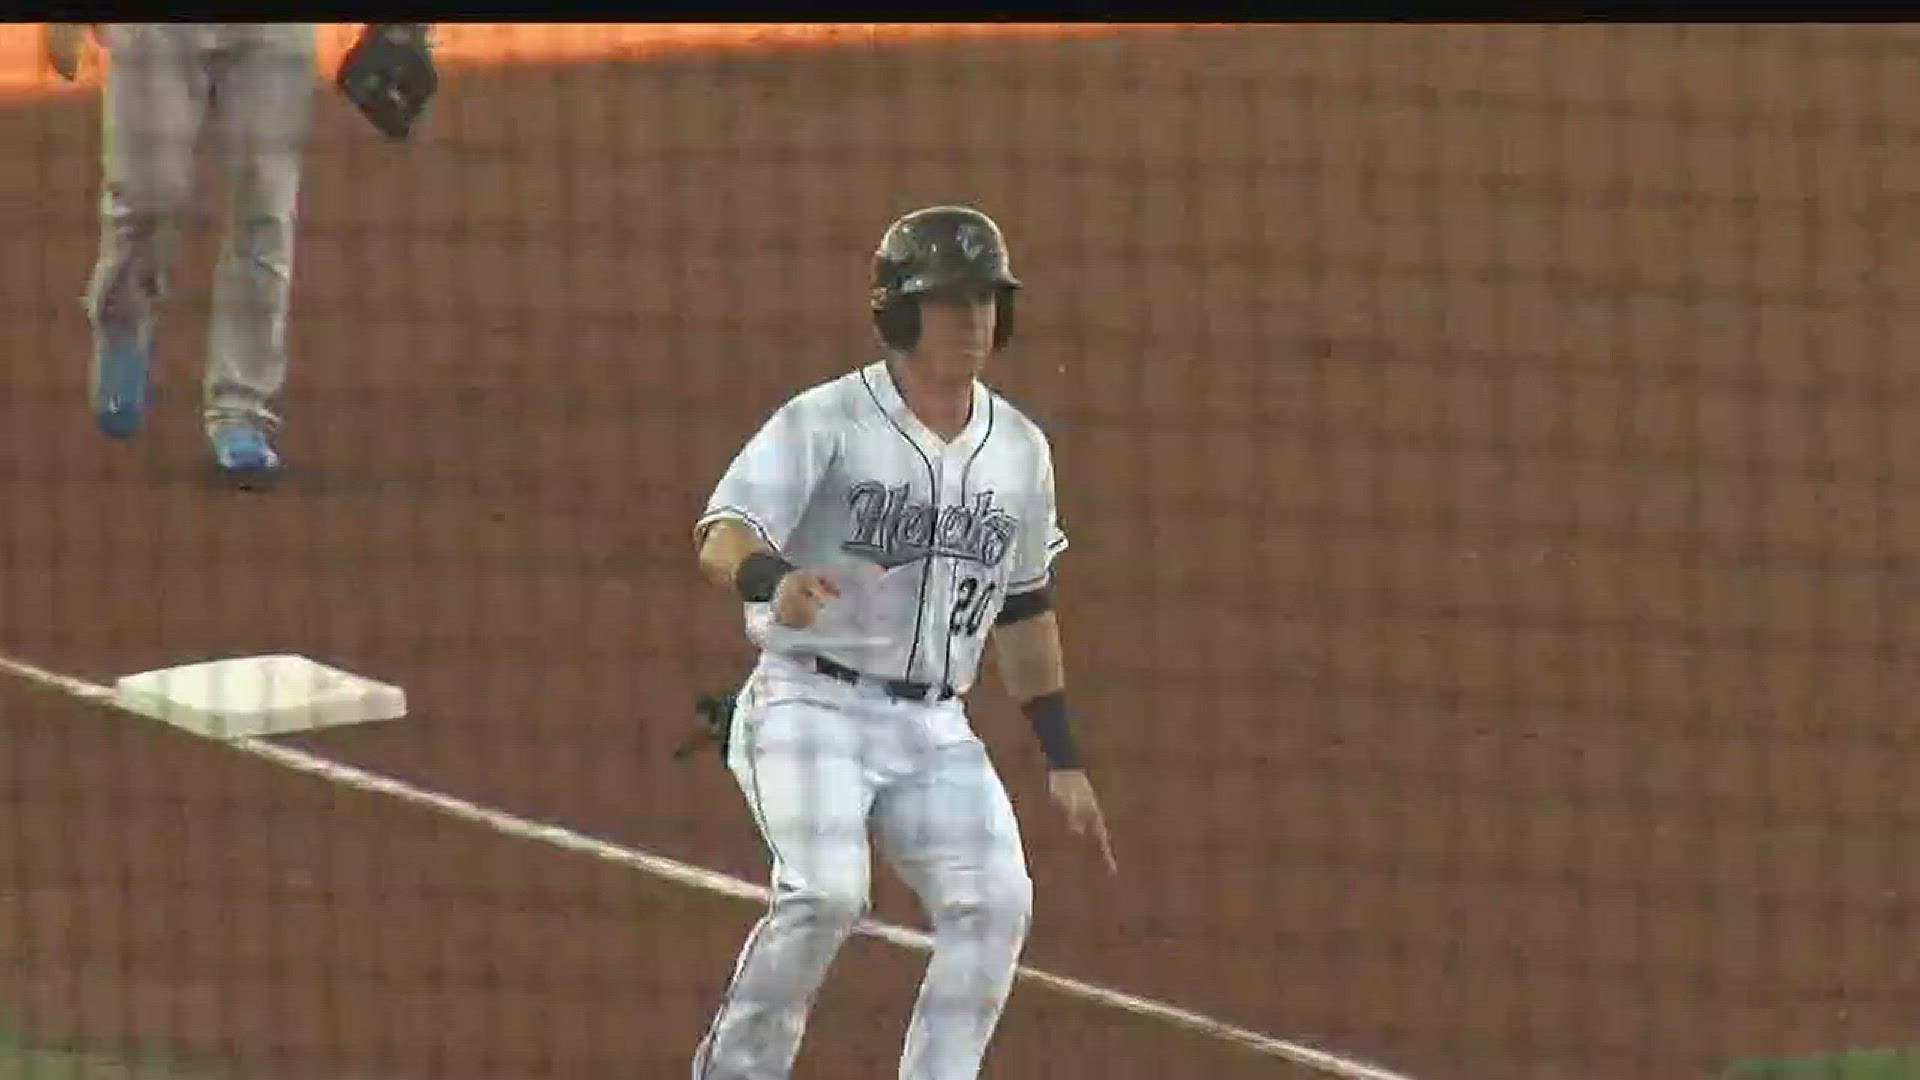 Corpus Christi padded its lead over the Rockhounds for the final playoff spot to two games with a 4-2 win Thursday.